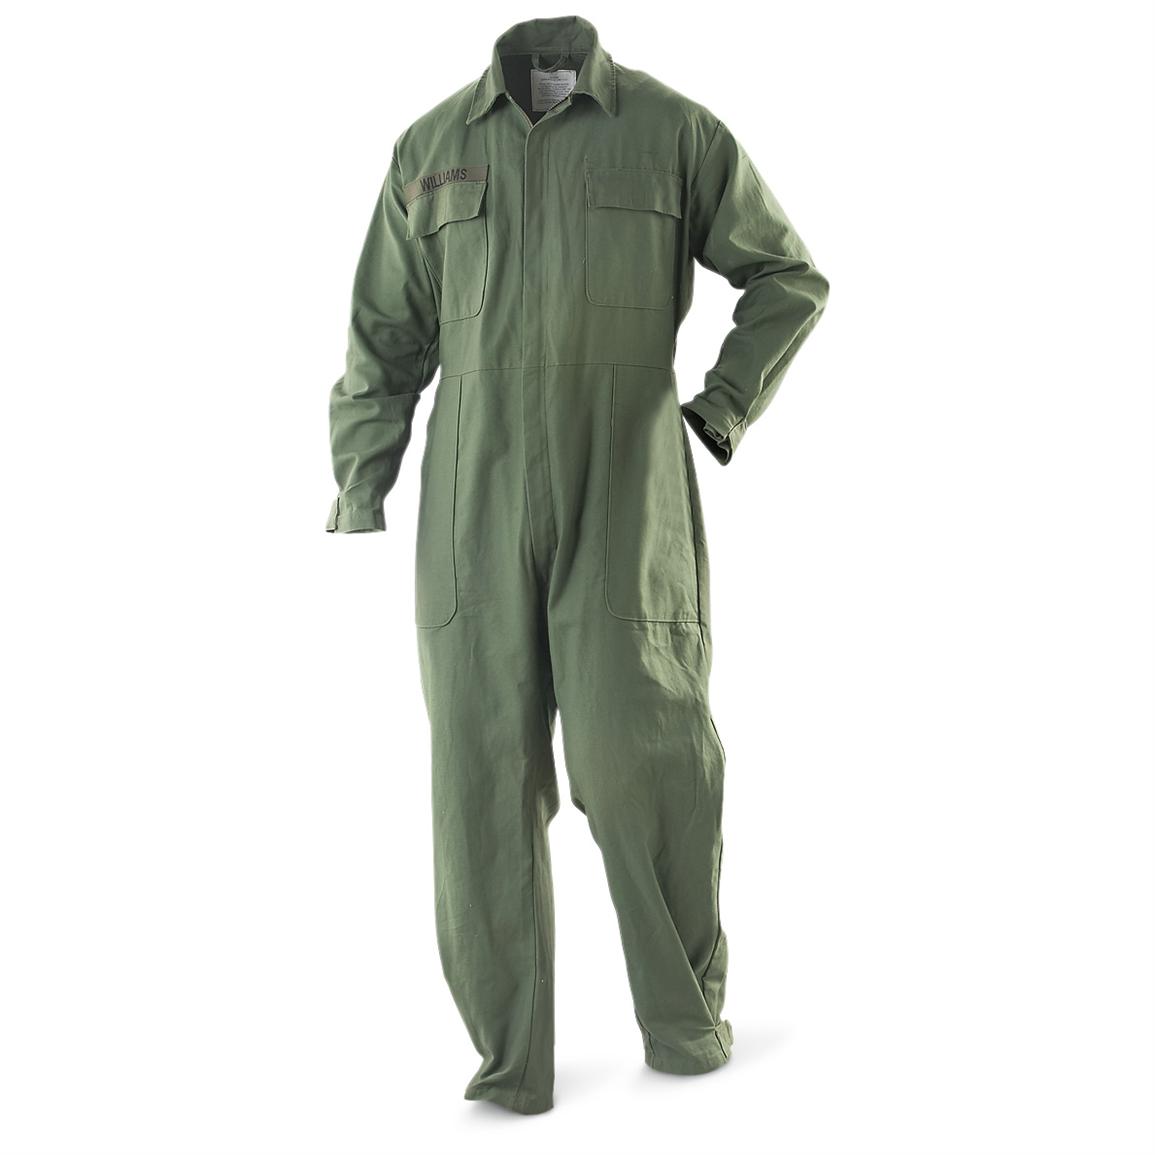 Army Mechanic Coveralls - Army Military